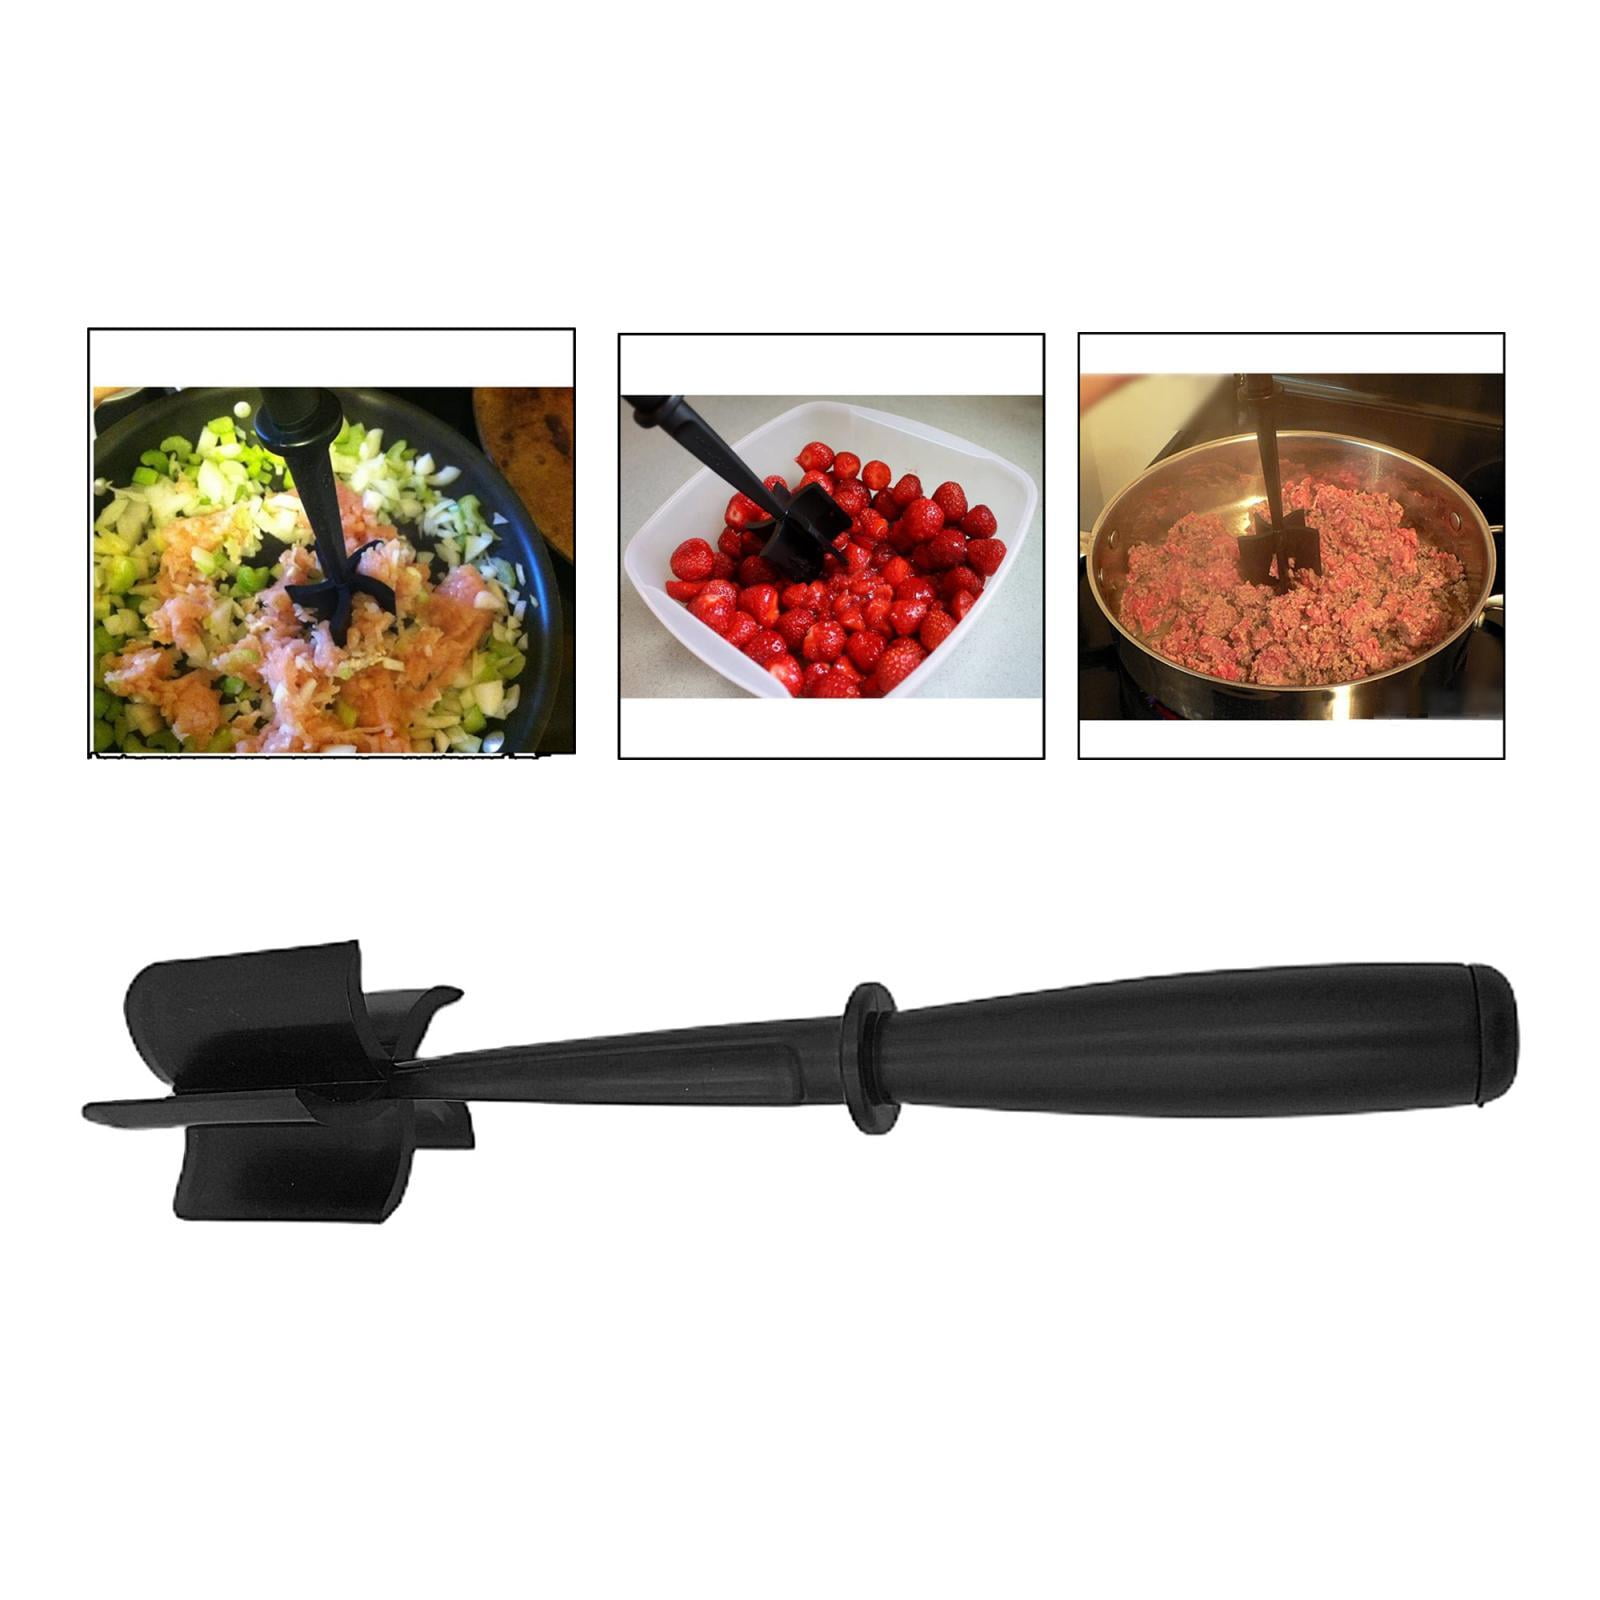 PGYARD Meat Chopper, Hamburger Chopper, Multifunctional Heat Resistant  Masher and Smasher for Hamburger Meat, Ground Beef